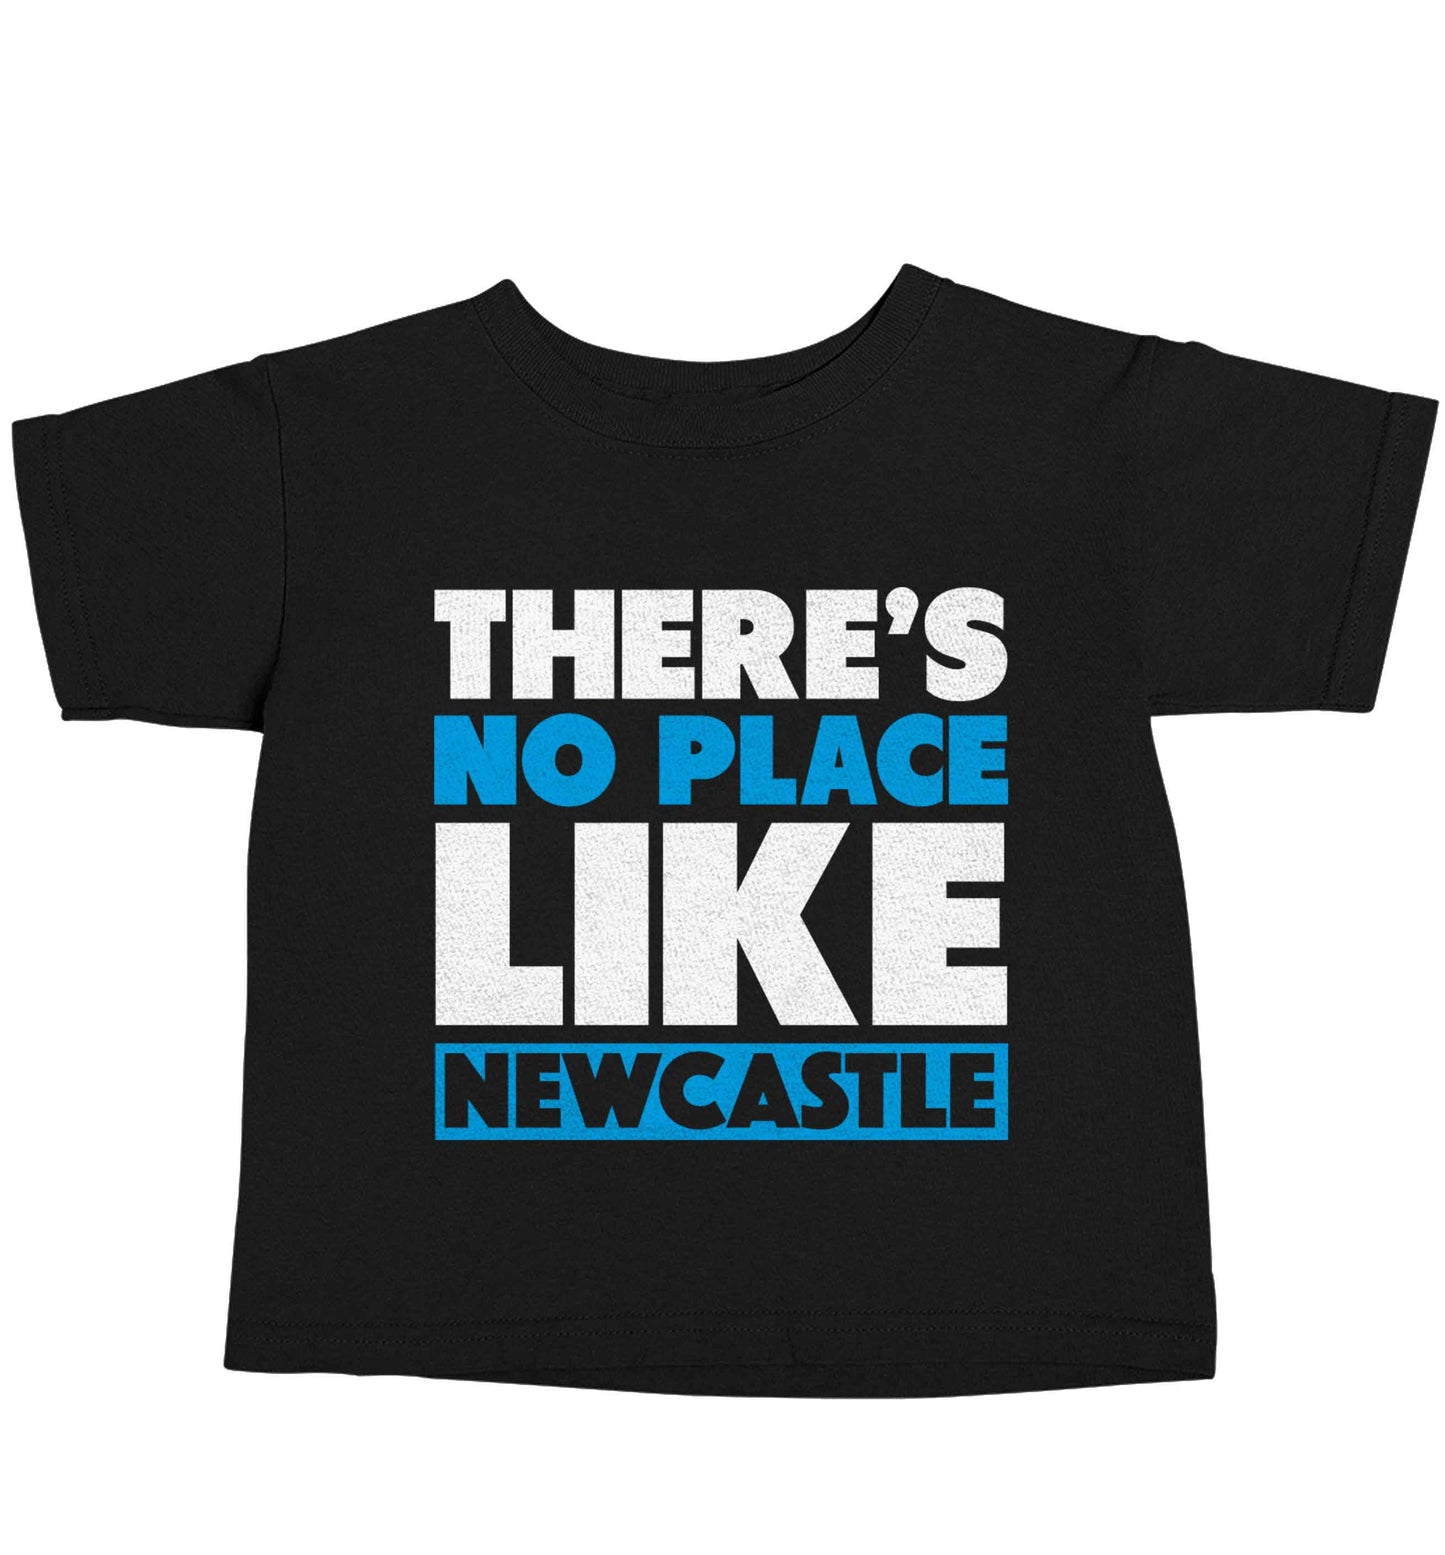 There's no place like Newcastle Black baby toddler Tshirt 2 years